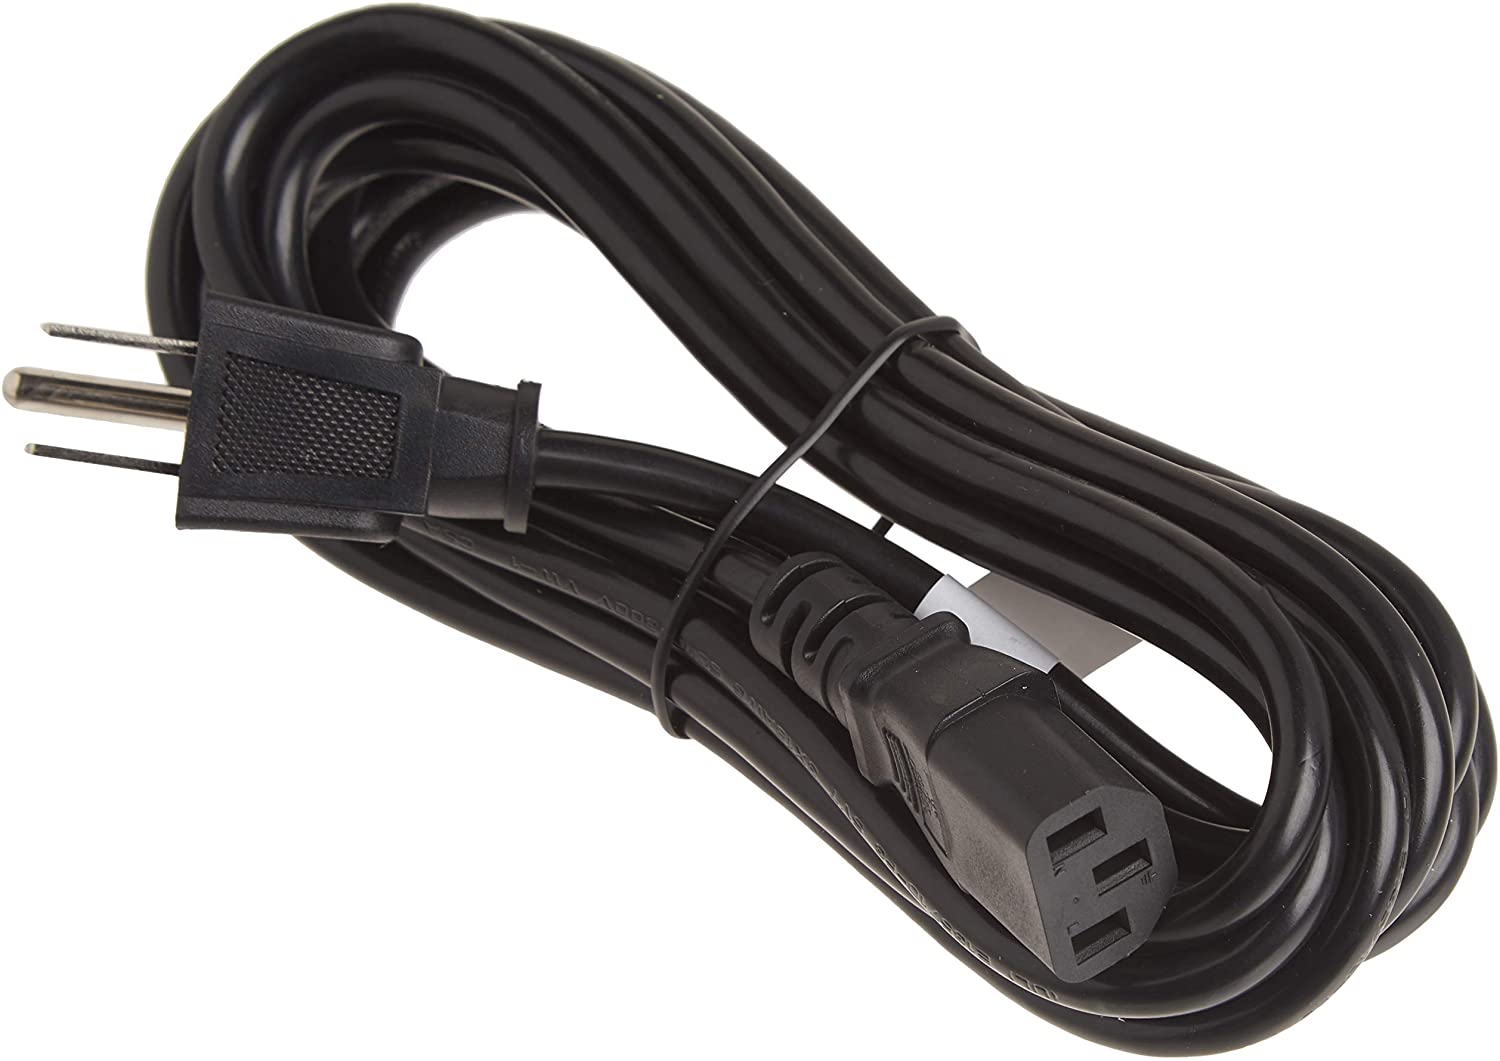 Universal power cable for computer, monitor & printer (6 feet).